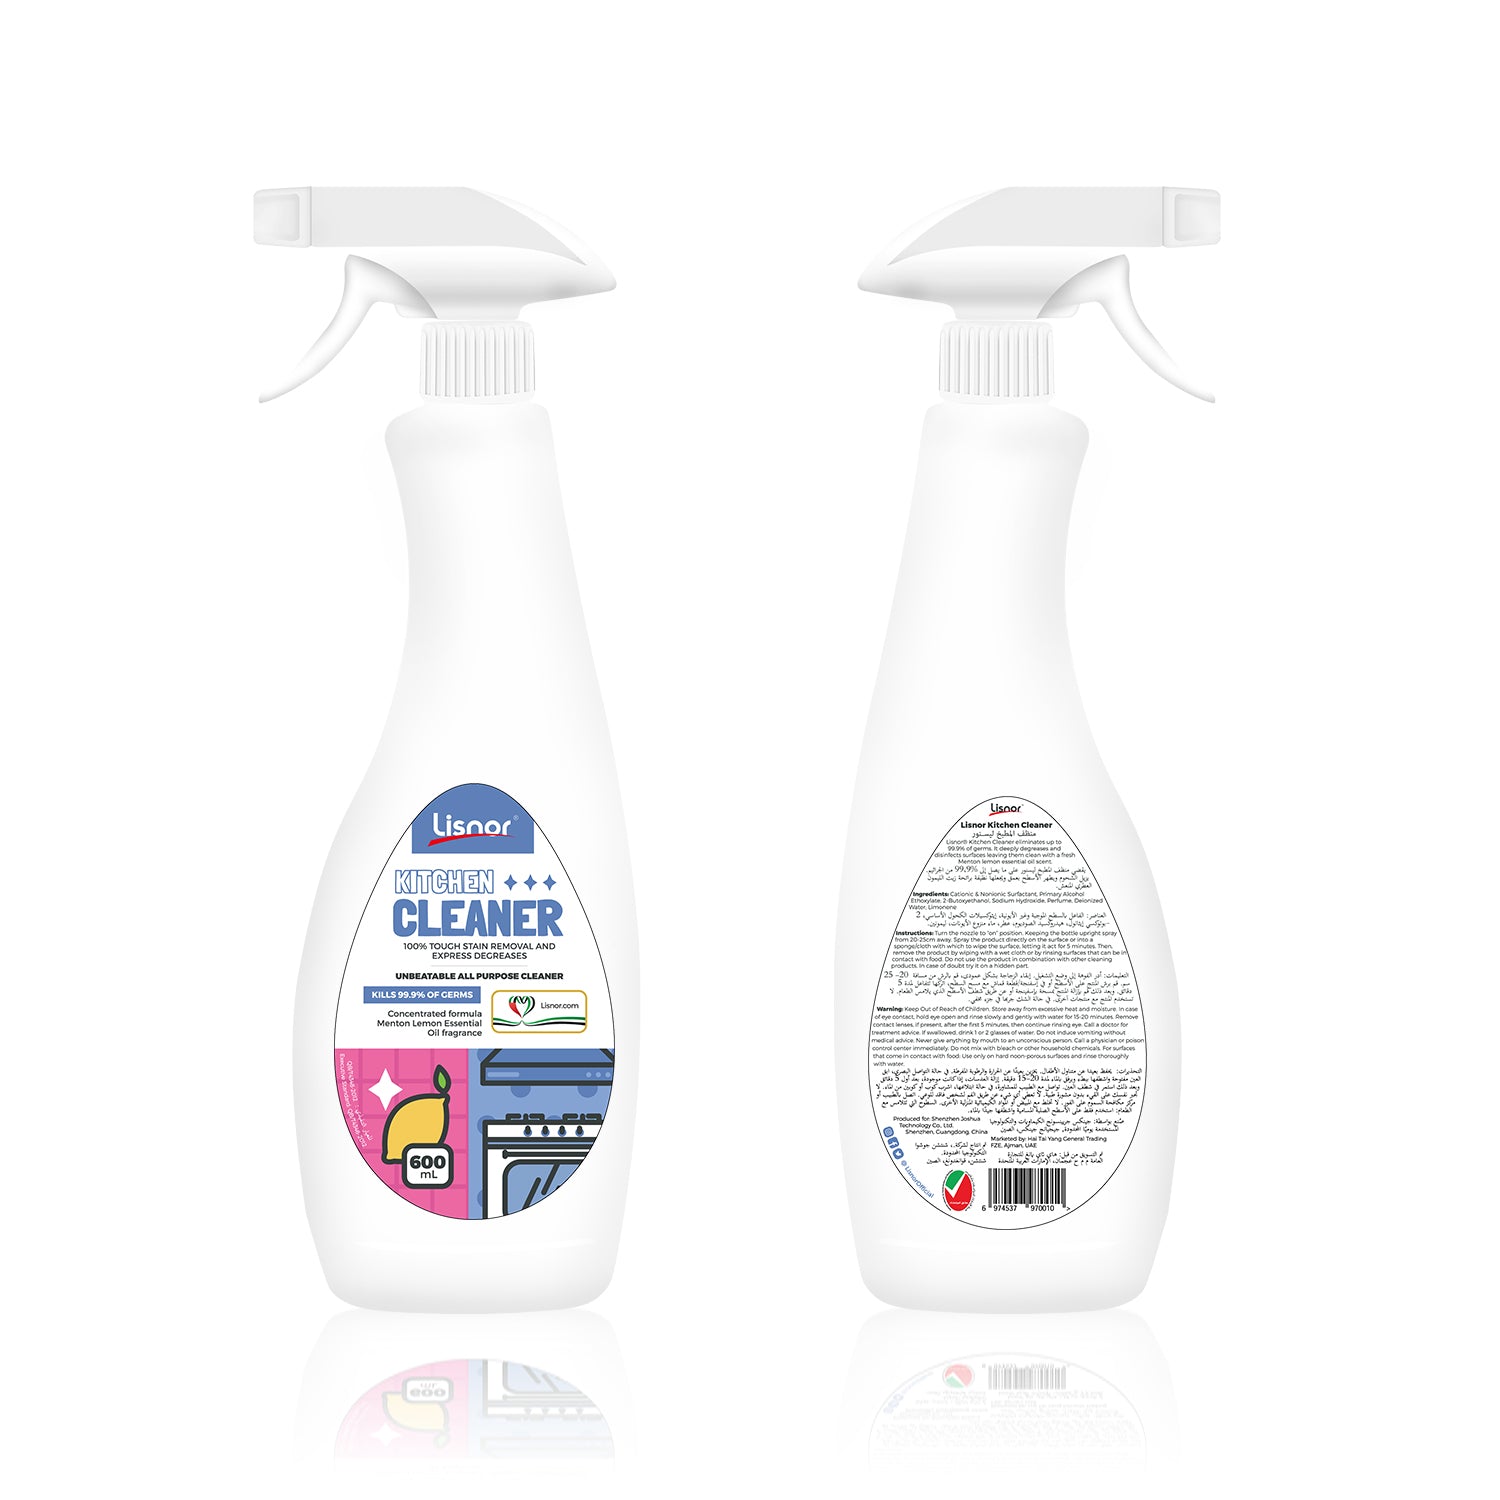 All Purpose Kitchen Cleaner 600ml. Unbeatable All Purpose Cleaner. Kills 99% of Germs. Removes Tough Stain, Greases & Grime. Menton Lemon Fragrant.